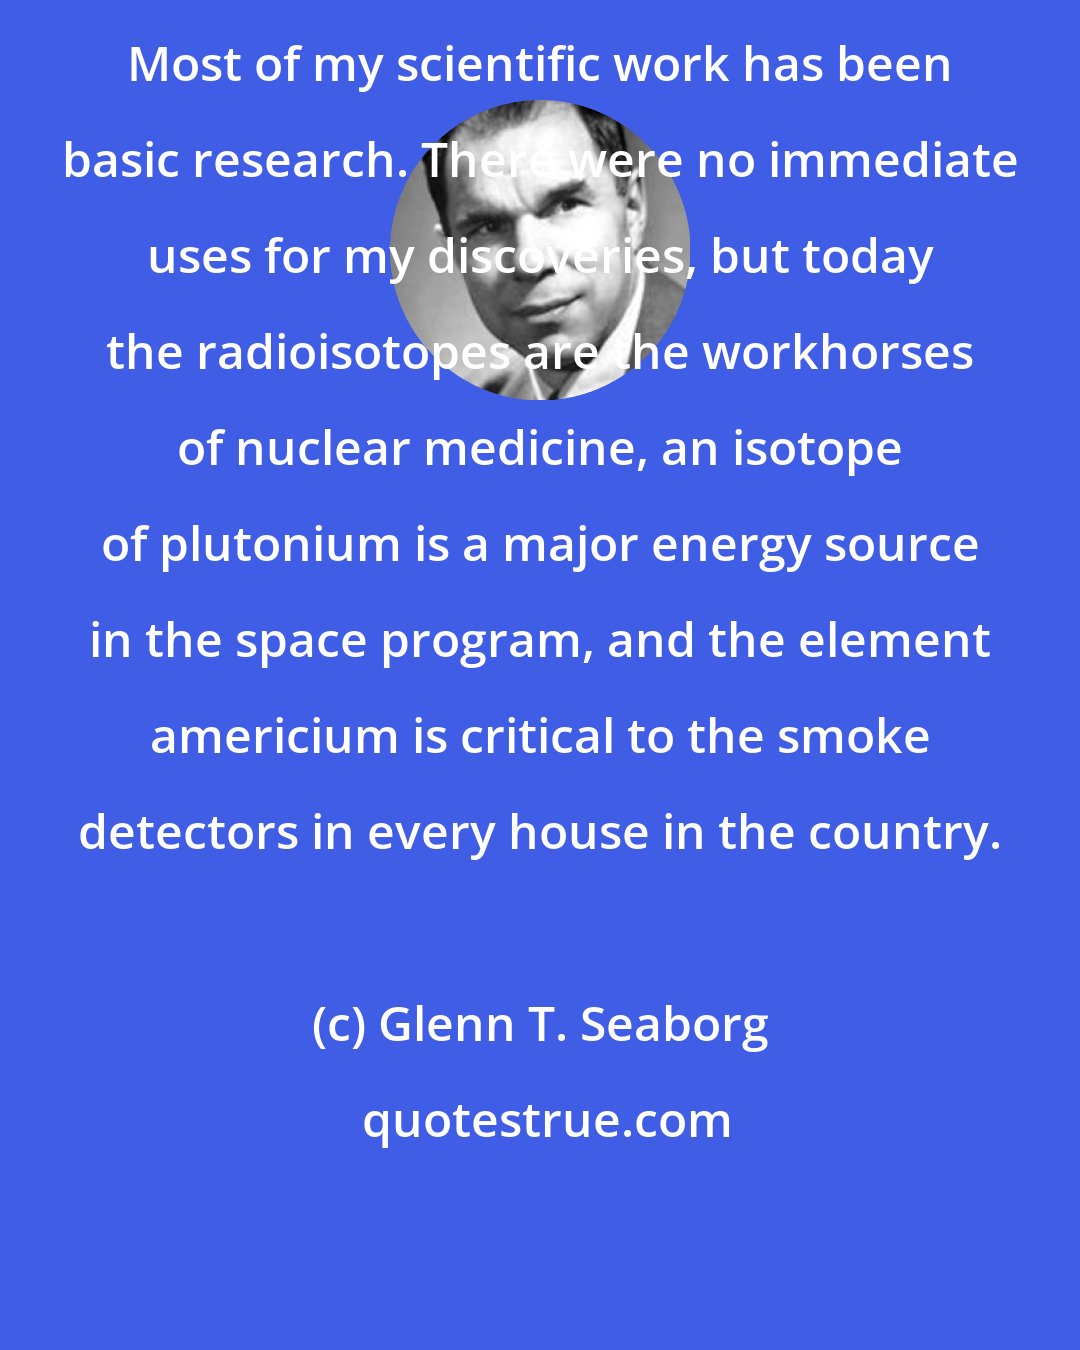 Glenn T. Seaborg: Most of my scientific work has been basic research. There were no immediate uses for my discoveries, but today the radioisotopes are the workhorses of nuclear medicine, an isotope of plutonium is a major energy source in the space program, and the element americium is critical to the smoke detectors in every house in the country.